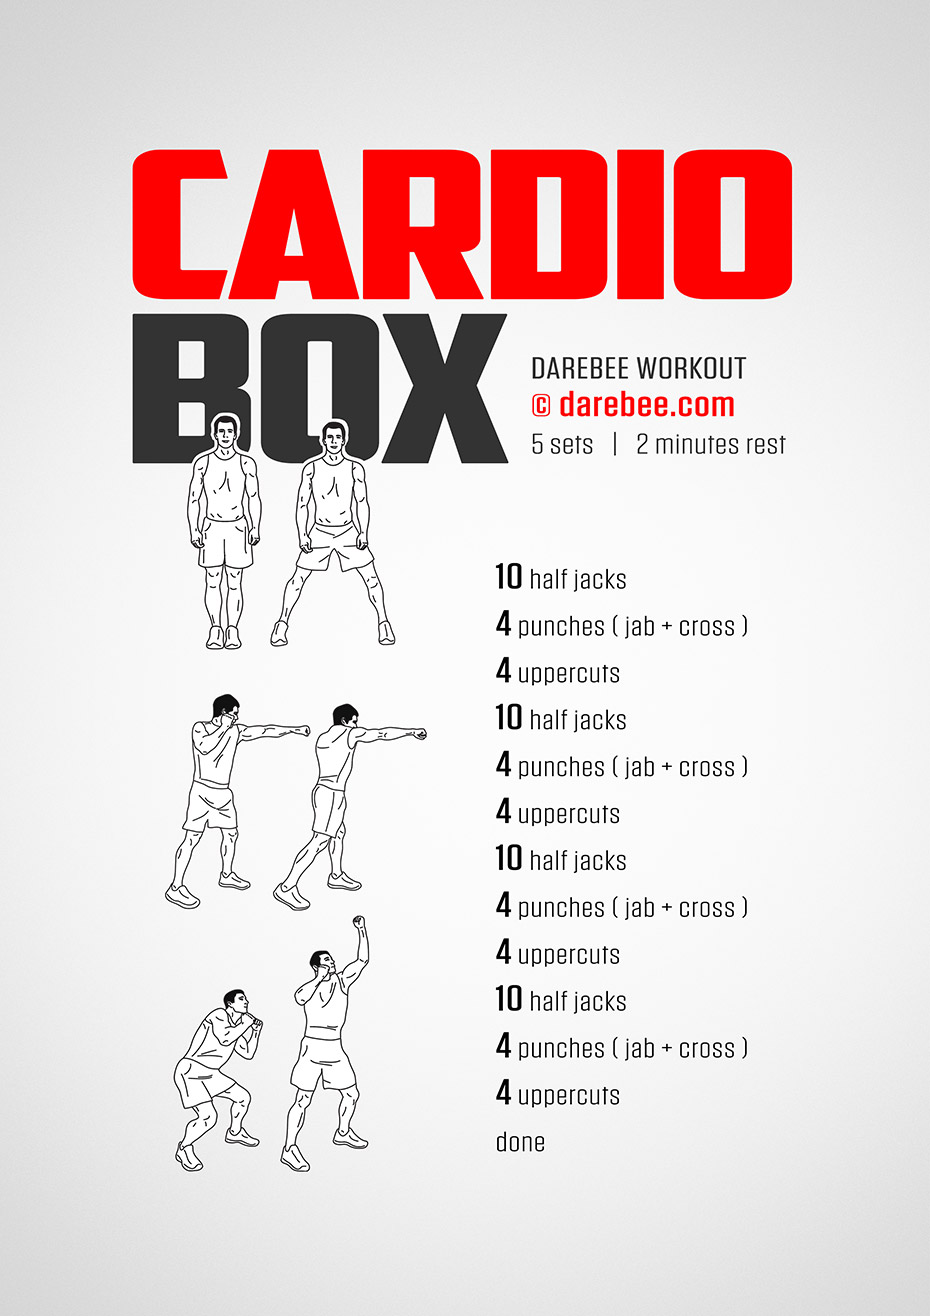 10 Minute Cardio workout images for Push Pull Legs